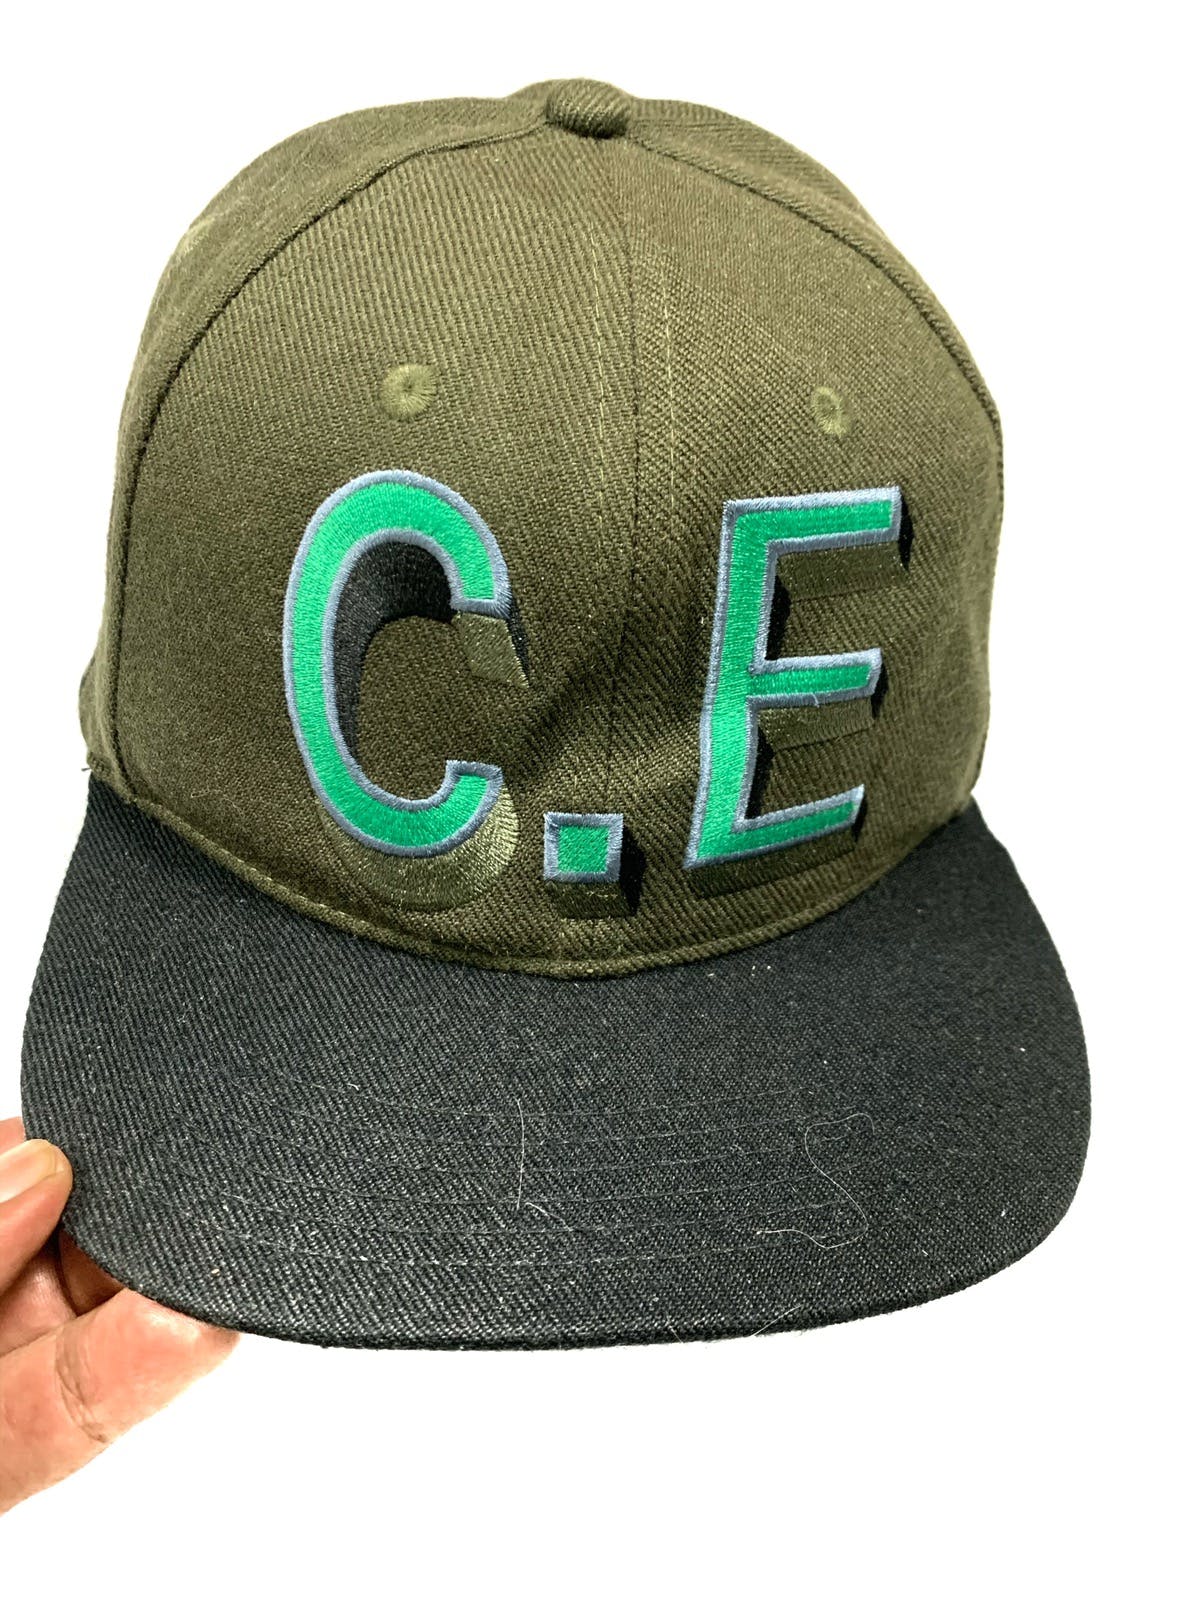 Cav empt leather stripe capp embroidery - 2